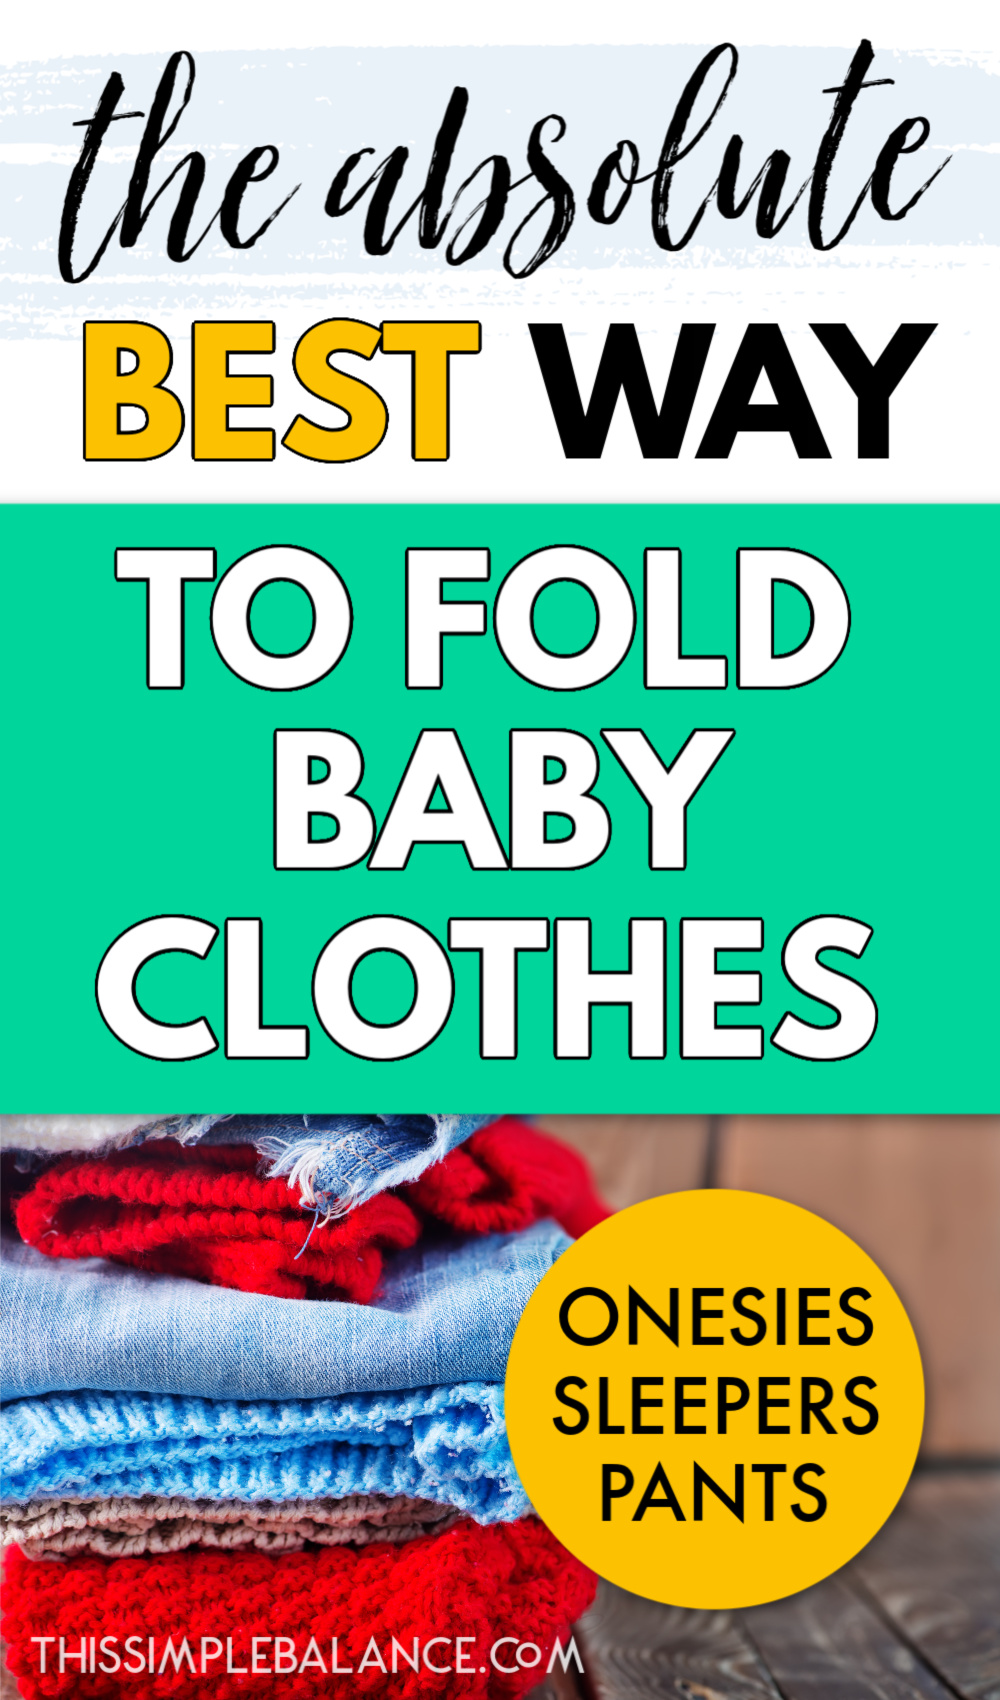 stack of folded baby clothes with text overlay, "the absolute best way to fold baby clothes - onesies, sleepers, pants"